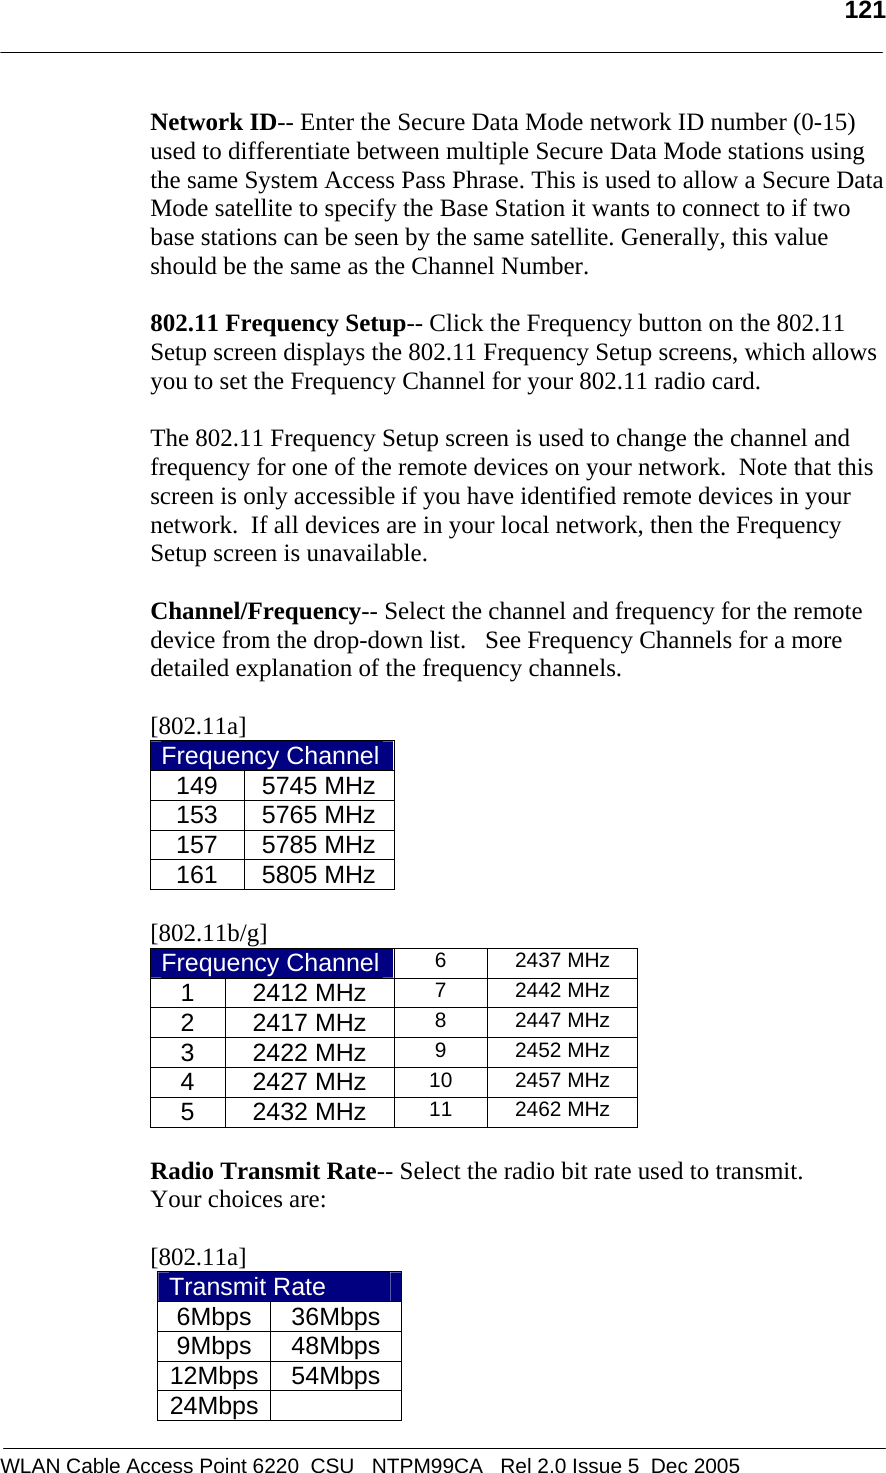   121  WLAN Cable Access Point 6220  CSU   NTPM99CA   Rel 2.0 Issue 5  Dec 2005 Network ID-- Enter the Secure Data Mode network ID number (0-15) used to differentiate between multiple Secure Data Mode stations using the same System Access Pass Phrase. This is used to allow a Secure Data Mode satellite to specify the Base Station it wants to connect to if two base stations can be seen by the same satellite. Generally, this value should be the same as the Channel Number.  802.11 Frequency Setup-- Click the Frequency button on the 802.11 Setup screen displays the 802.11 Frequency Setup screens, which allows you to set the Frequency Channel for your 802.11 radio card.  The 802.11 Frequency Setup screen is used to change the channel and frequency for one of the remote devices on your network.  Note that this screen is only accessible if you have identified remote devices in your network.  If all devices are in your local network, then the Frequency Setup screen is unavailable.  Channel/Frequency-- Select the channel and frequency for the remote device from the drop-down list.   See Frequency Channels for a more detailed explanation of the frequency channels.  [802.11a]  Frequency Channel149 5745 MHz153 5765 MHz157 5785 MHz161 5805 MHz [802.11b/g]  Frequency Channel 6 2437 MHz 1 2412 MHz  7 2442 MHz 2 2417 MHz  8 2447 MHz 3 2422 MHz  9 2452 MHz 4 2427 MHz  10 2457 MHz 5 2432 MHz  11 2462 MHz  Radio Transmit Rate-- Select the radio bit rate used to transmit.  Your choices are:  [802.11a]  Transmit Rate 6Mbps 36Mbps 9Mbps 48Mbps 12Mbps 54Mbps 24Mbps  